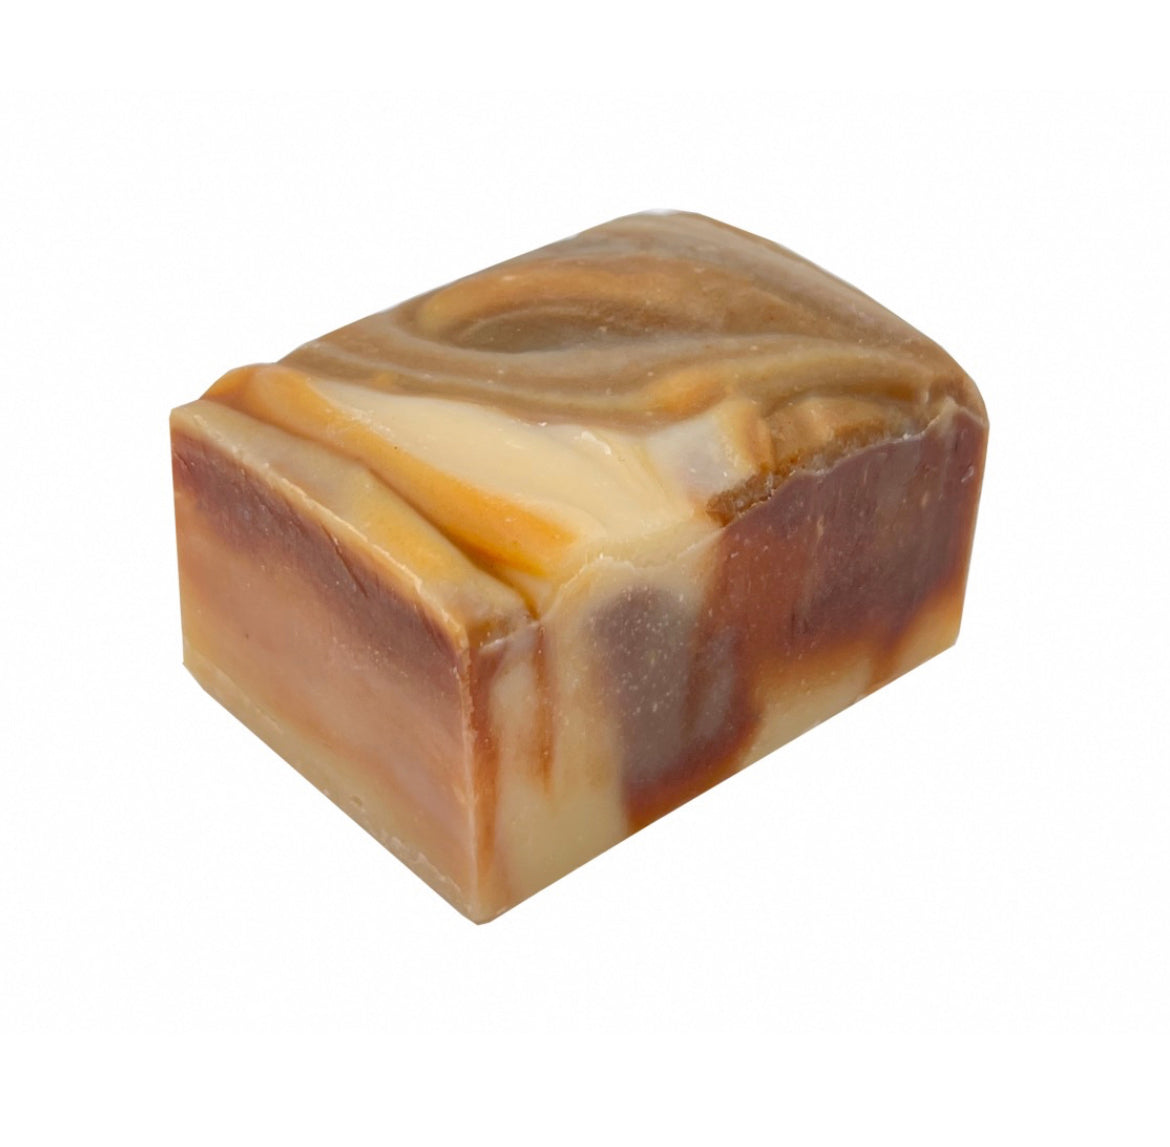 Funky Soap Shop Chocolate And Coconut Milk Soap